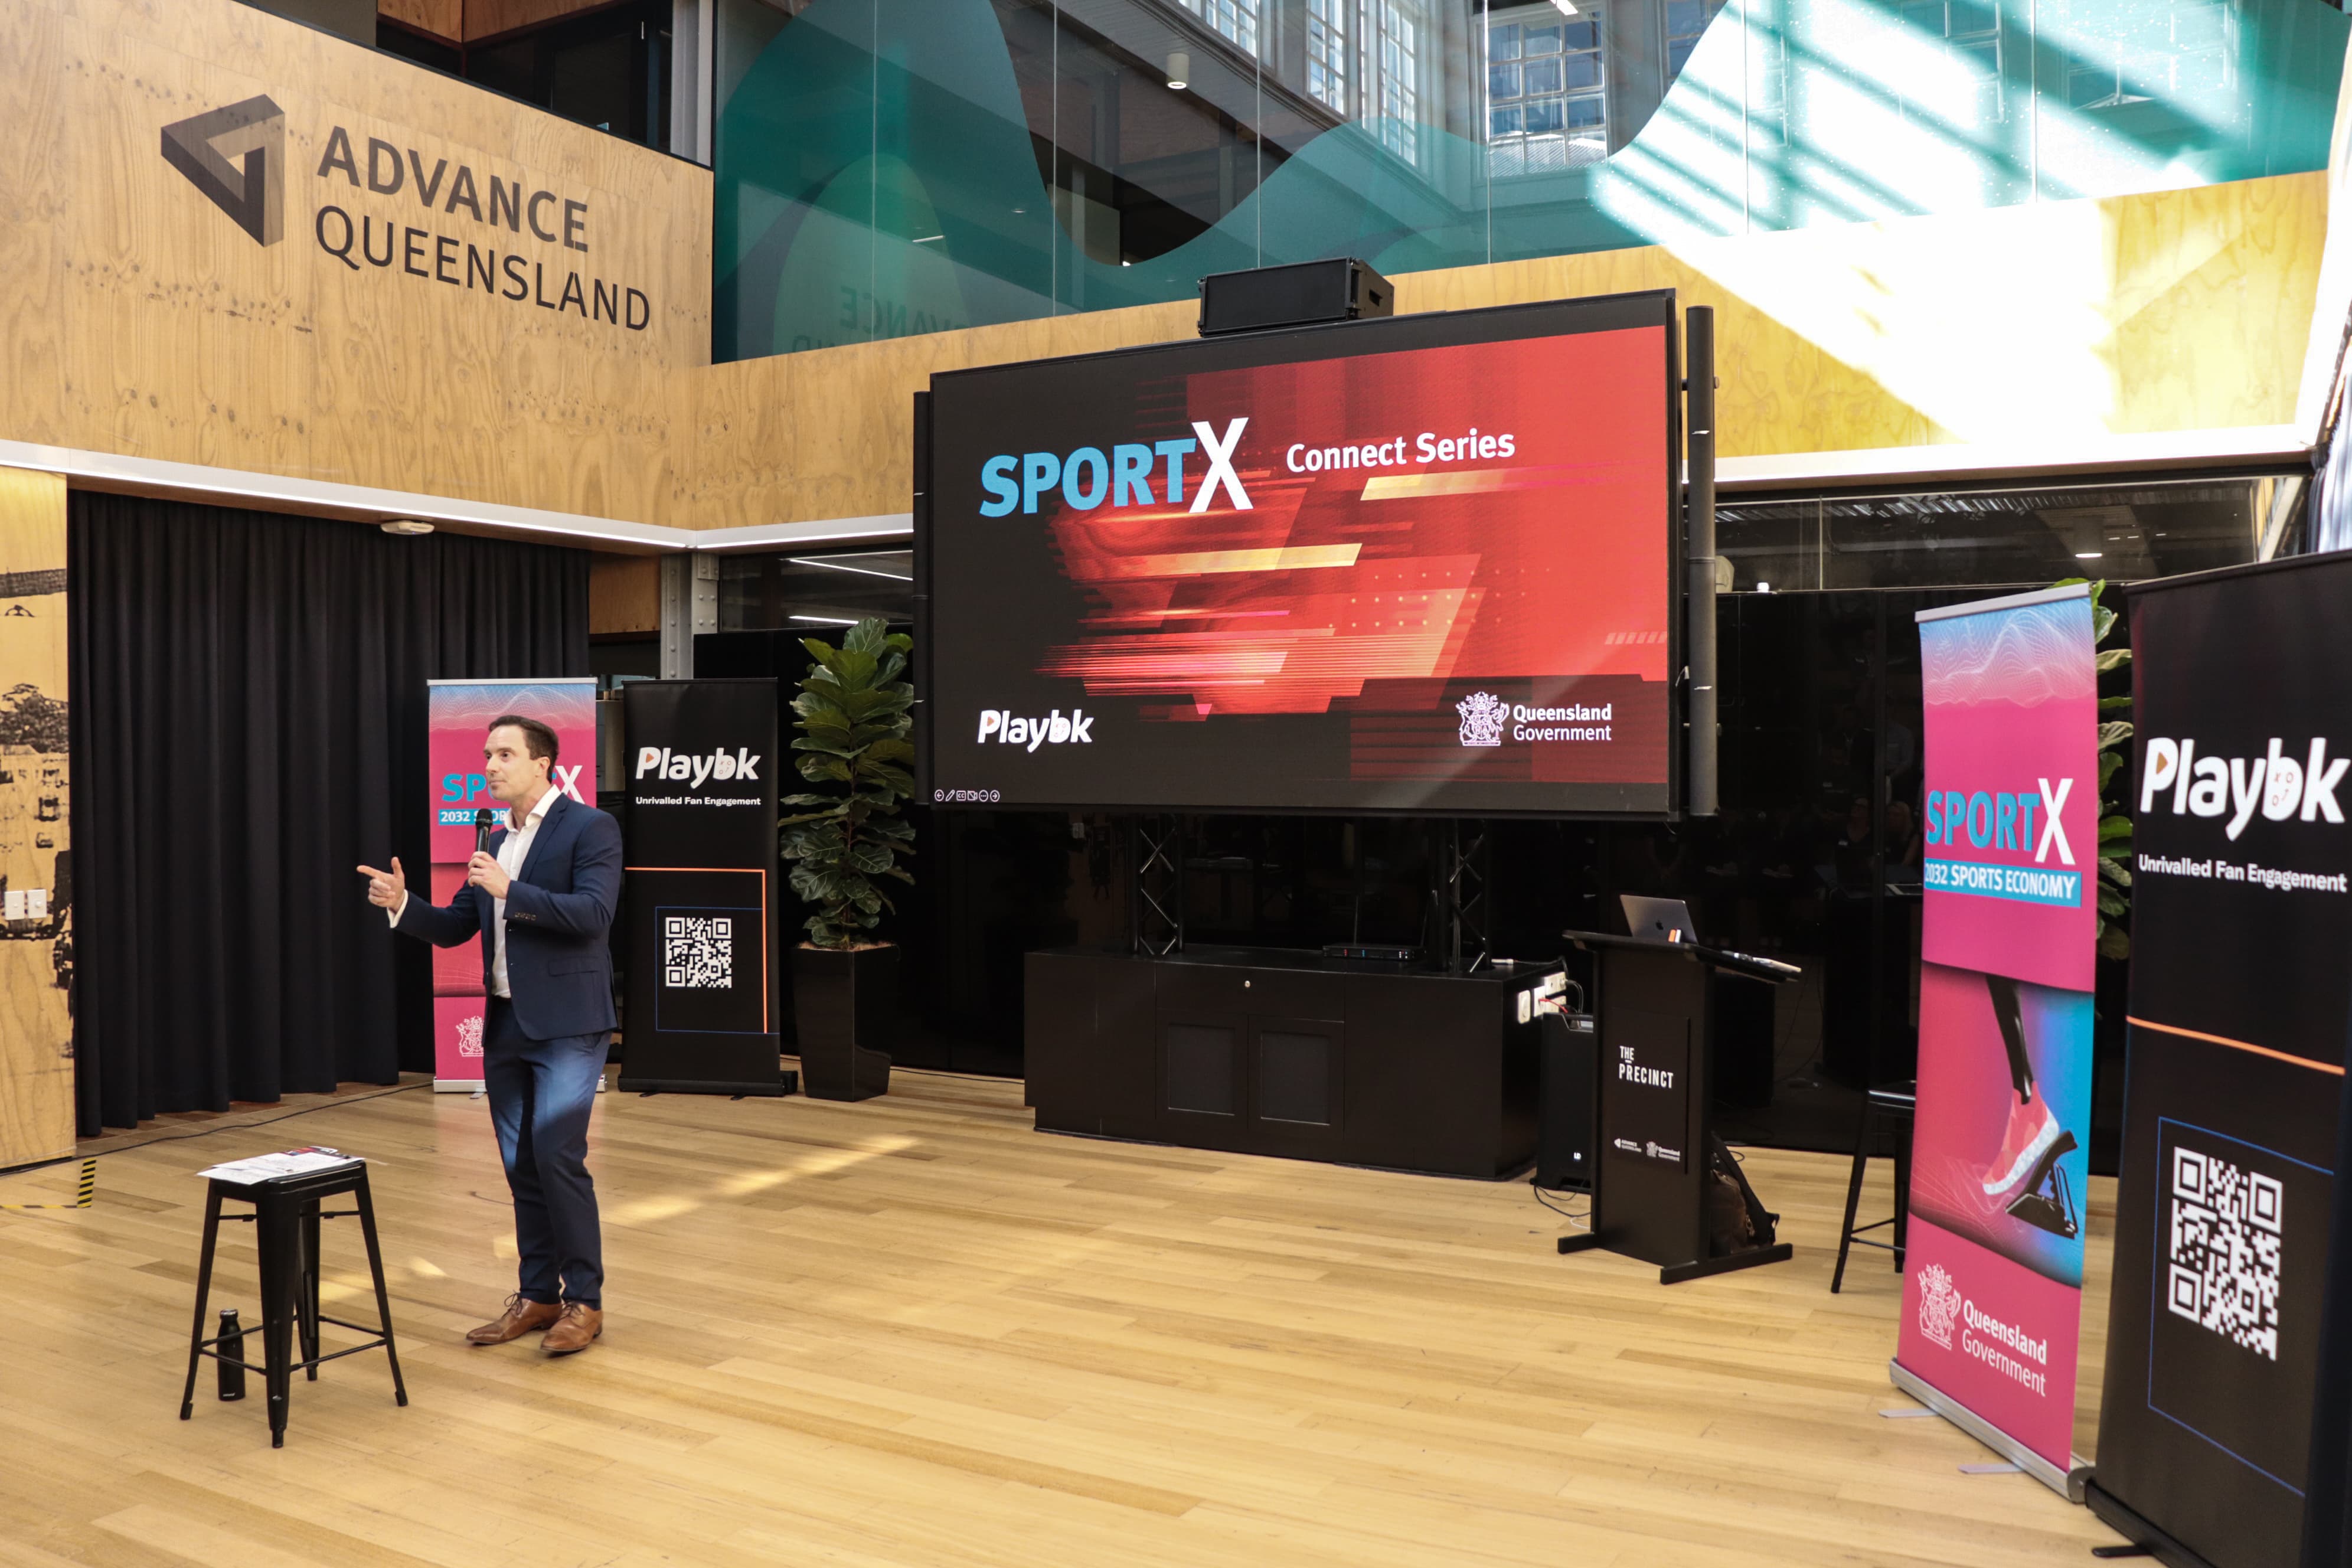 Man holding a microphone giving a presentation with a SportX logo in the background on a large screen